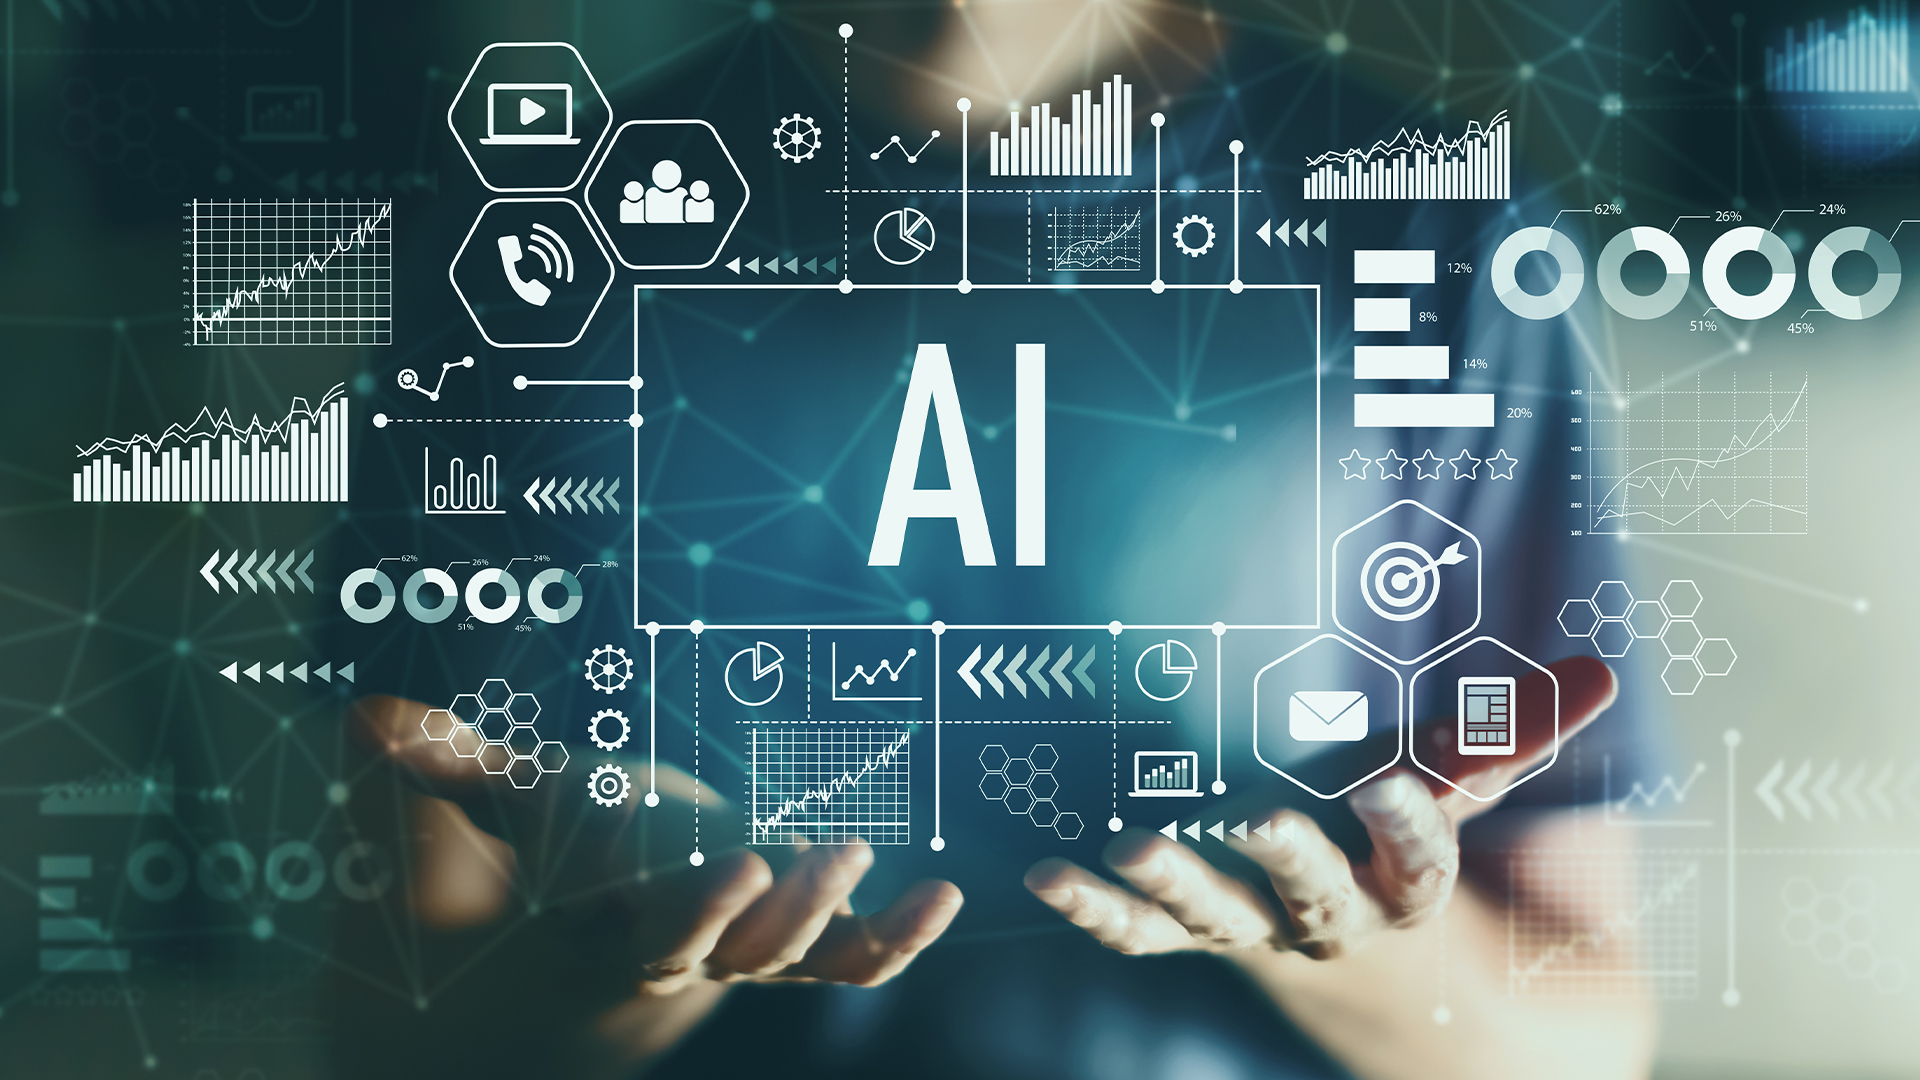 The National Economic and Development Authority (NEDA) and the Philippine Competition Commission (PCC) have collaborated to organize a comprehensive learning session on Artificial Intelligence (AI) tailored for key policymakers and media stakeholders.